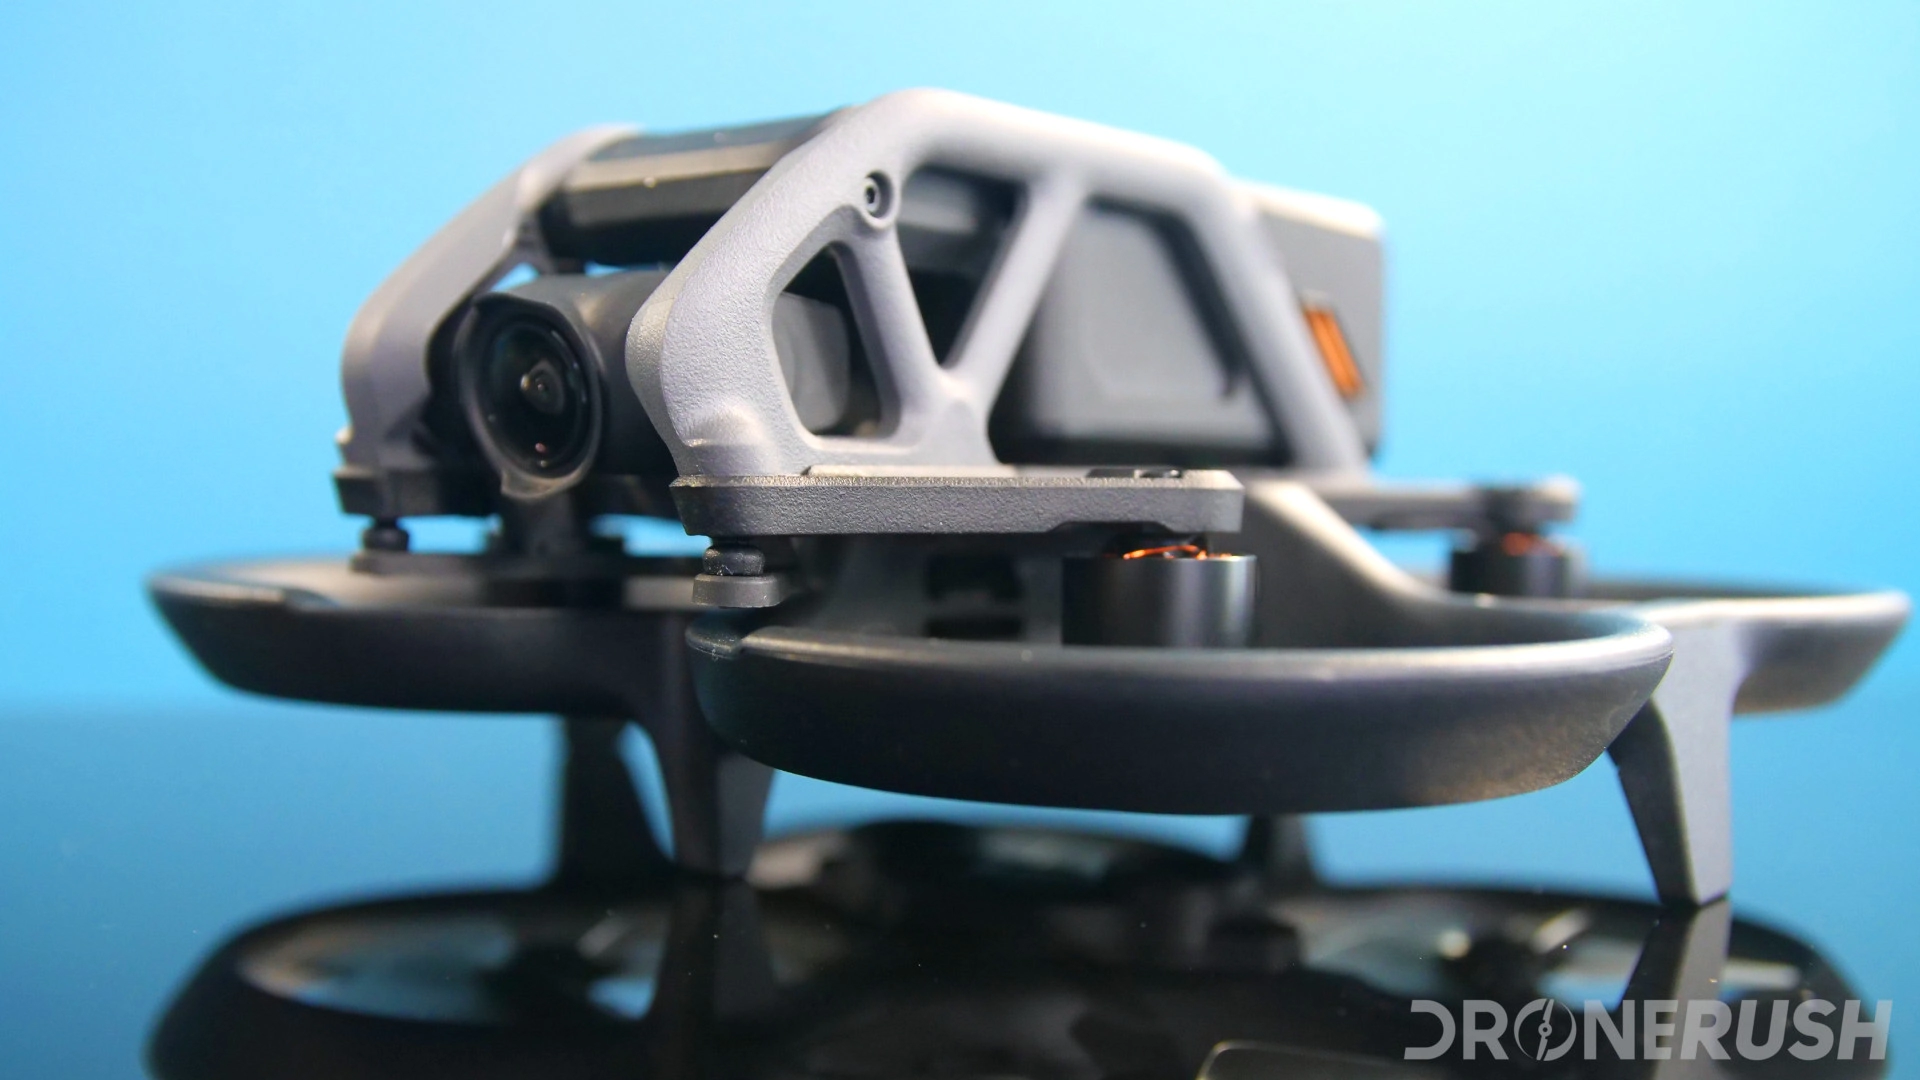 Drone Rush - Drone Rush is your source for news, reviews and more 